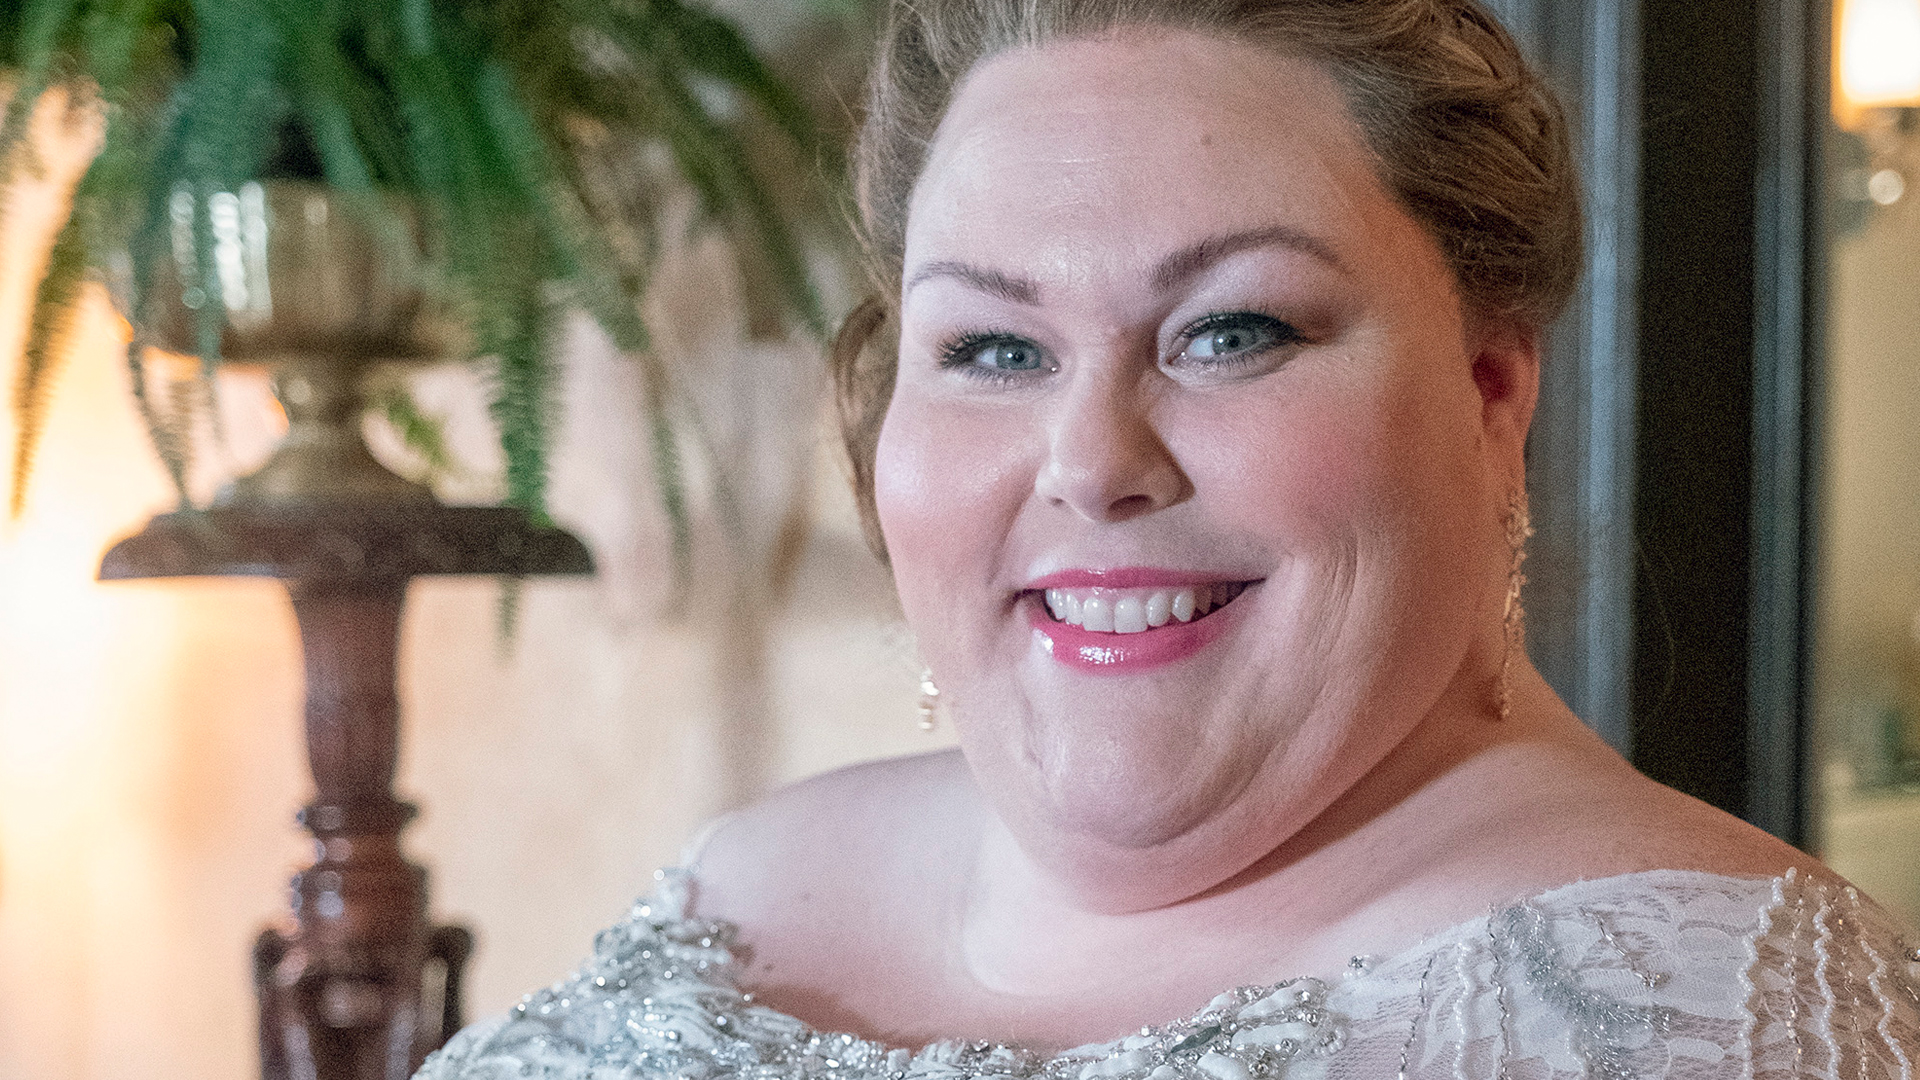 Chrissy Metz as Kate Pearson at her second wedding in the future in ‘This Is Us’ Season 5 Episode 16